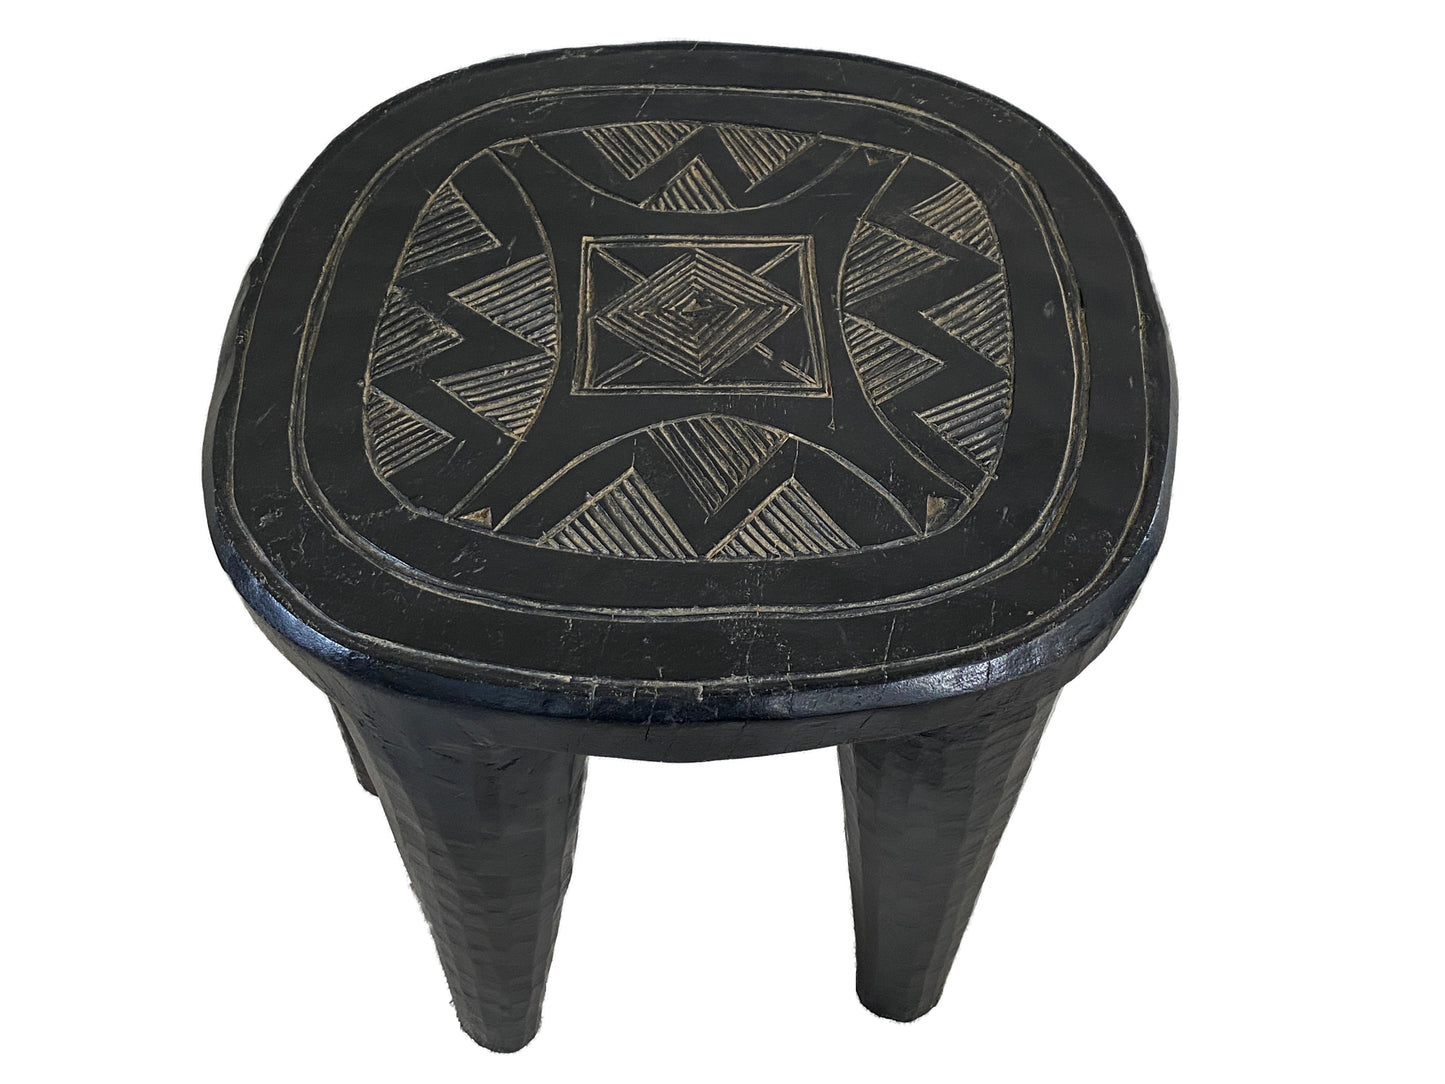 #4387 Superb African   Nupe Stool / Table Nigeria  15.25" W by 12" H